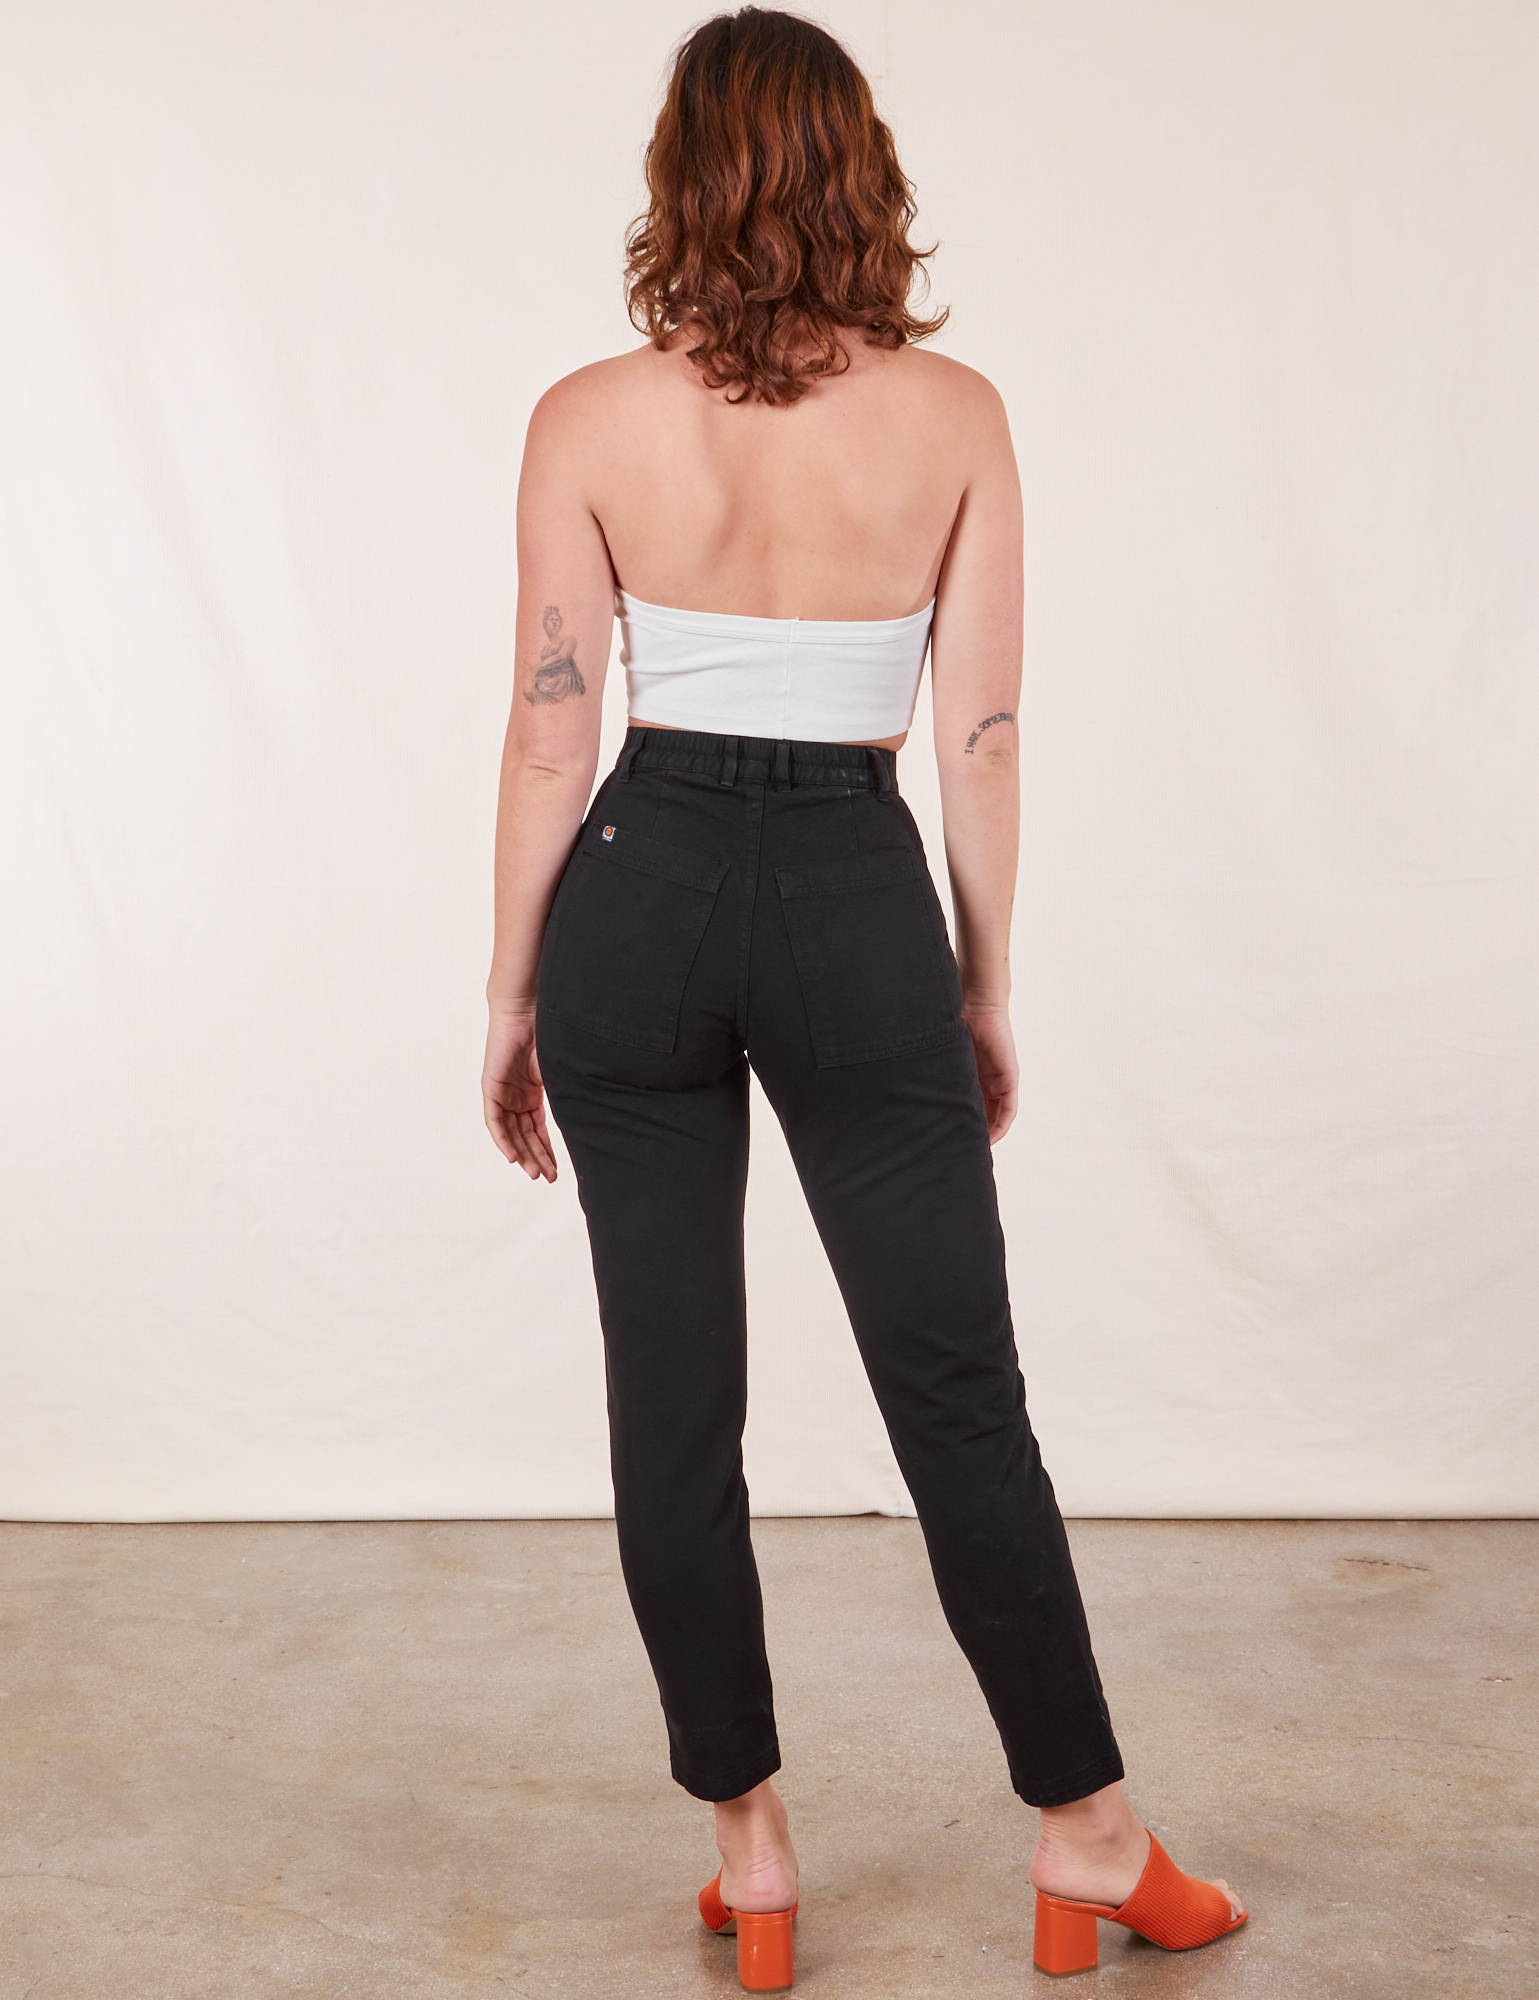 Back view of Pencil Pants in Basic Black and Halter Top in vintage tee off-white on Alex